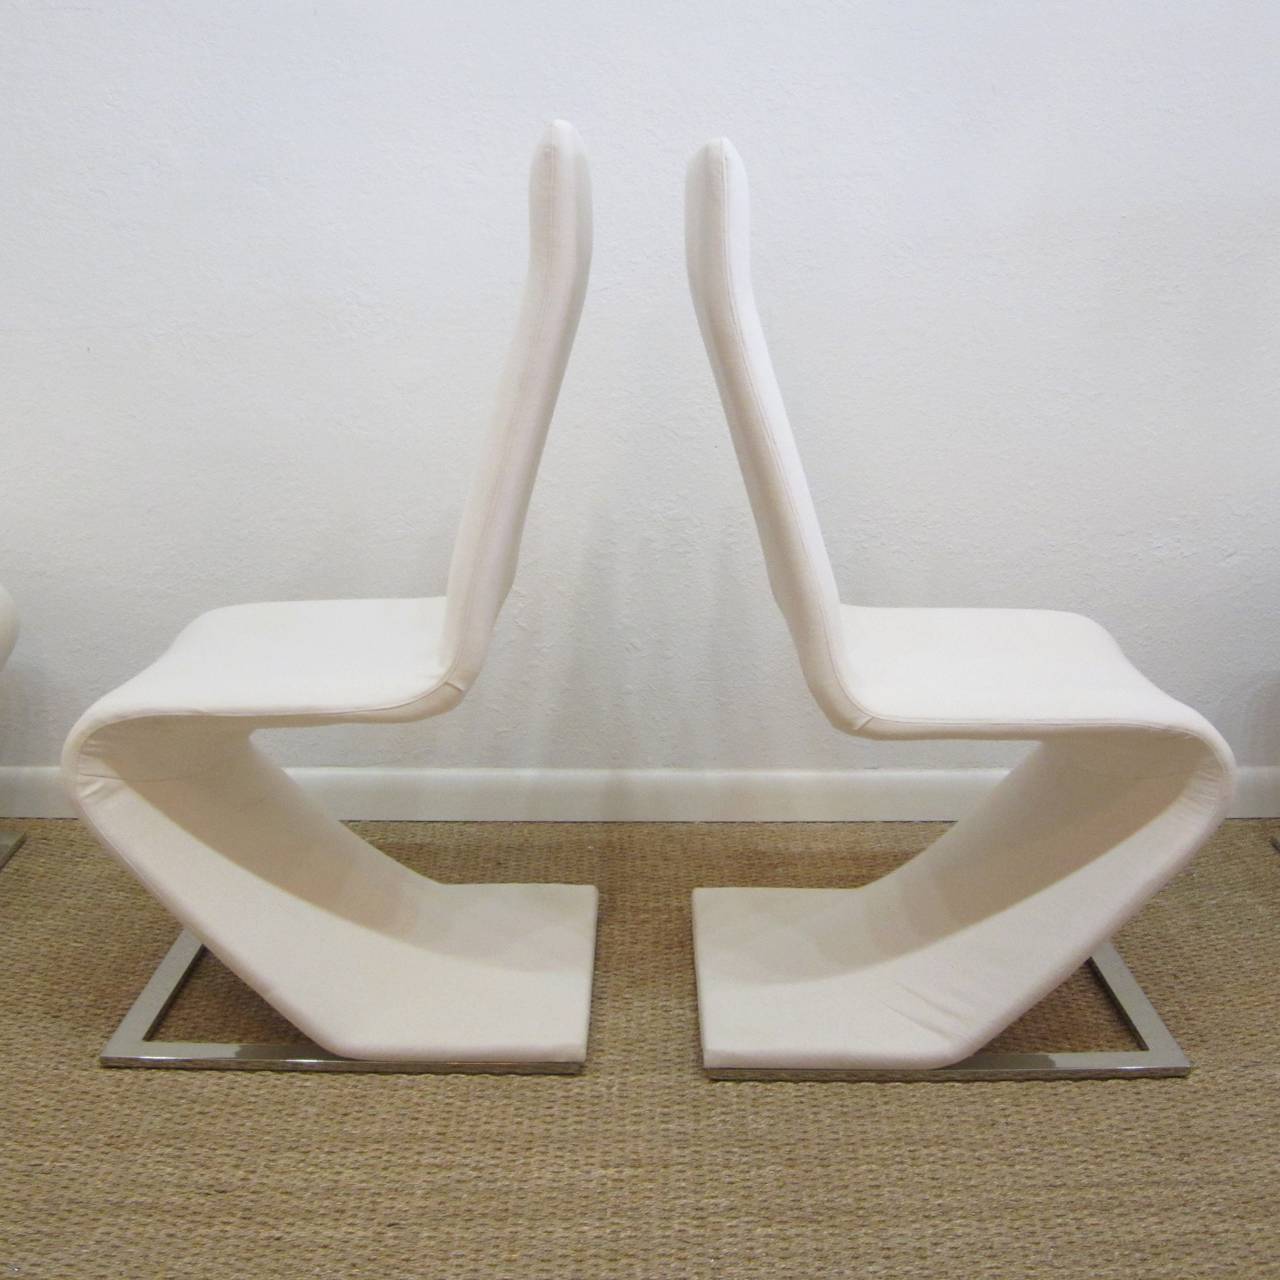 Polished Original Cantilevered Chairs with Steel Bases by Roger Rougier  For Sale